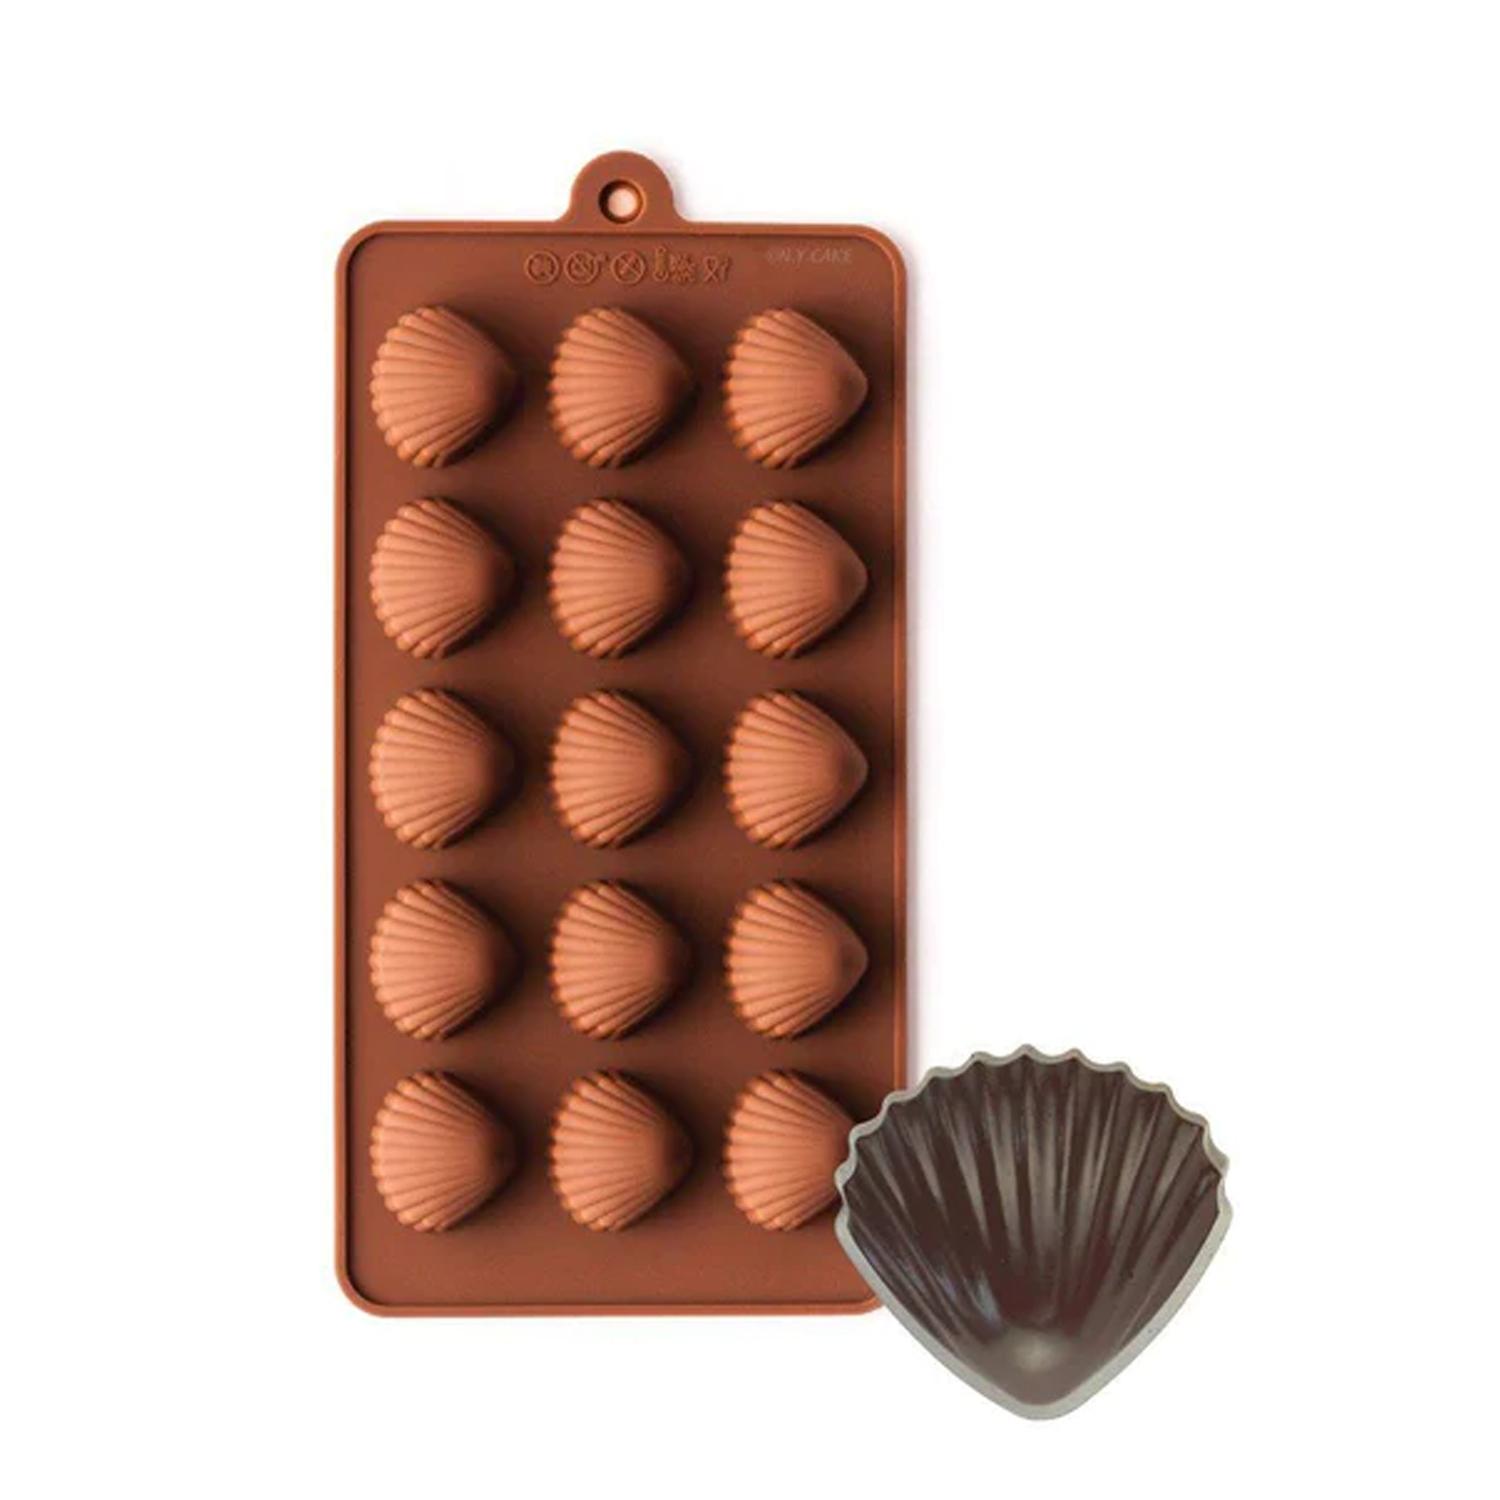 SCM0003 CHOCOLATE SILICONE MOULD SHELL